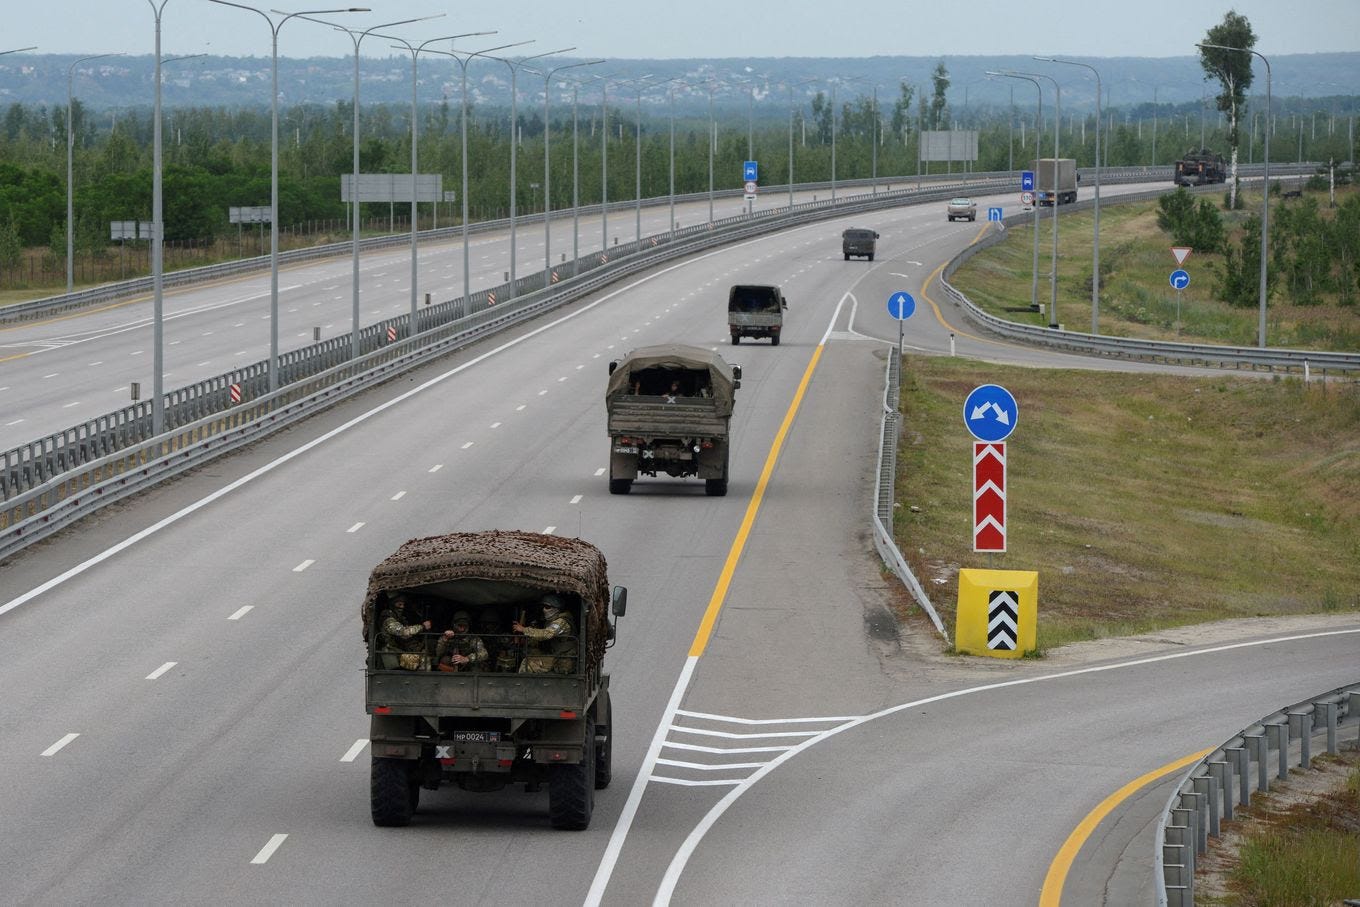 A column of Wagner mercenary group troops heads toward Moscow on the M4 highway Saturday near Voronezh. (Stringer/Reuters)